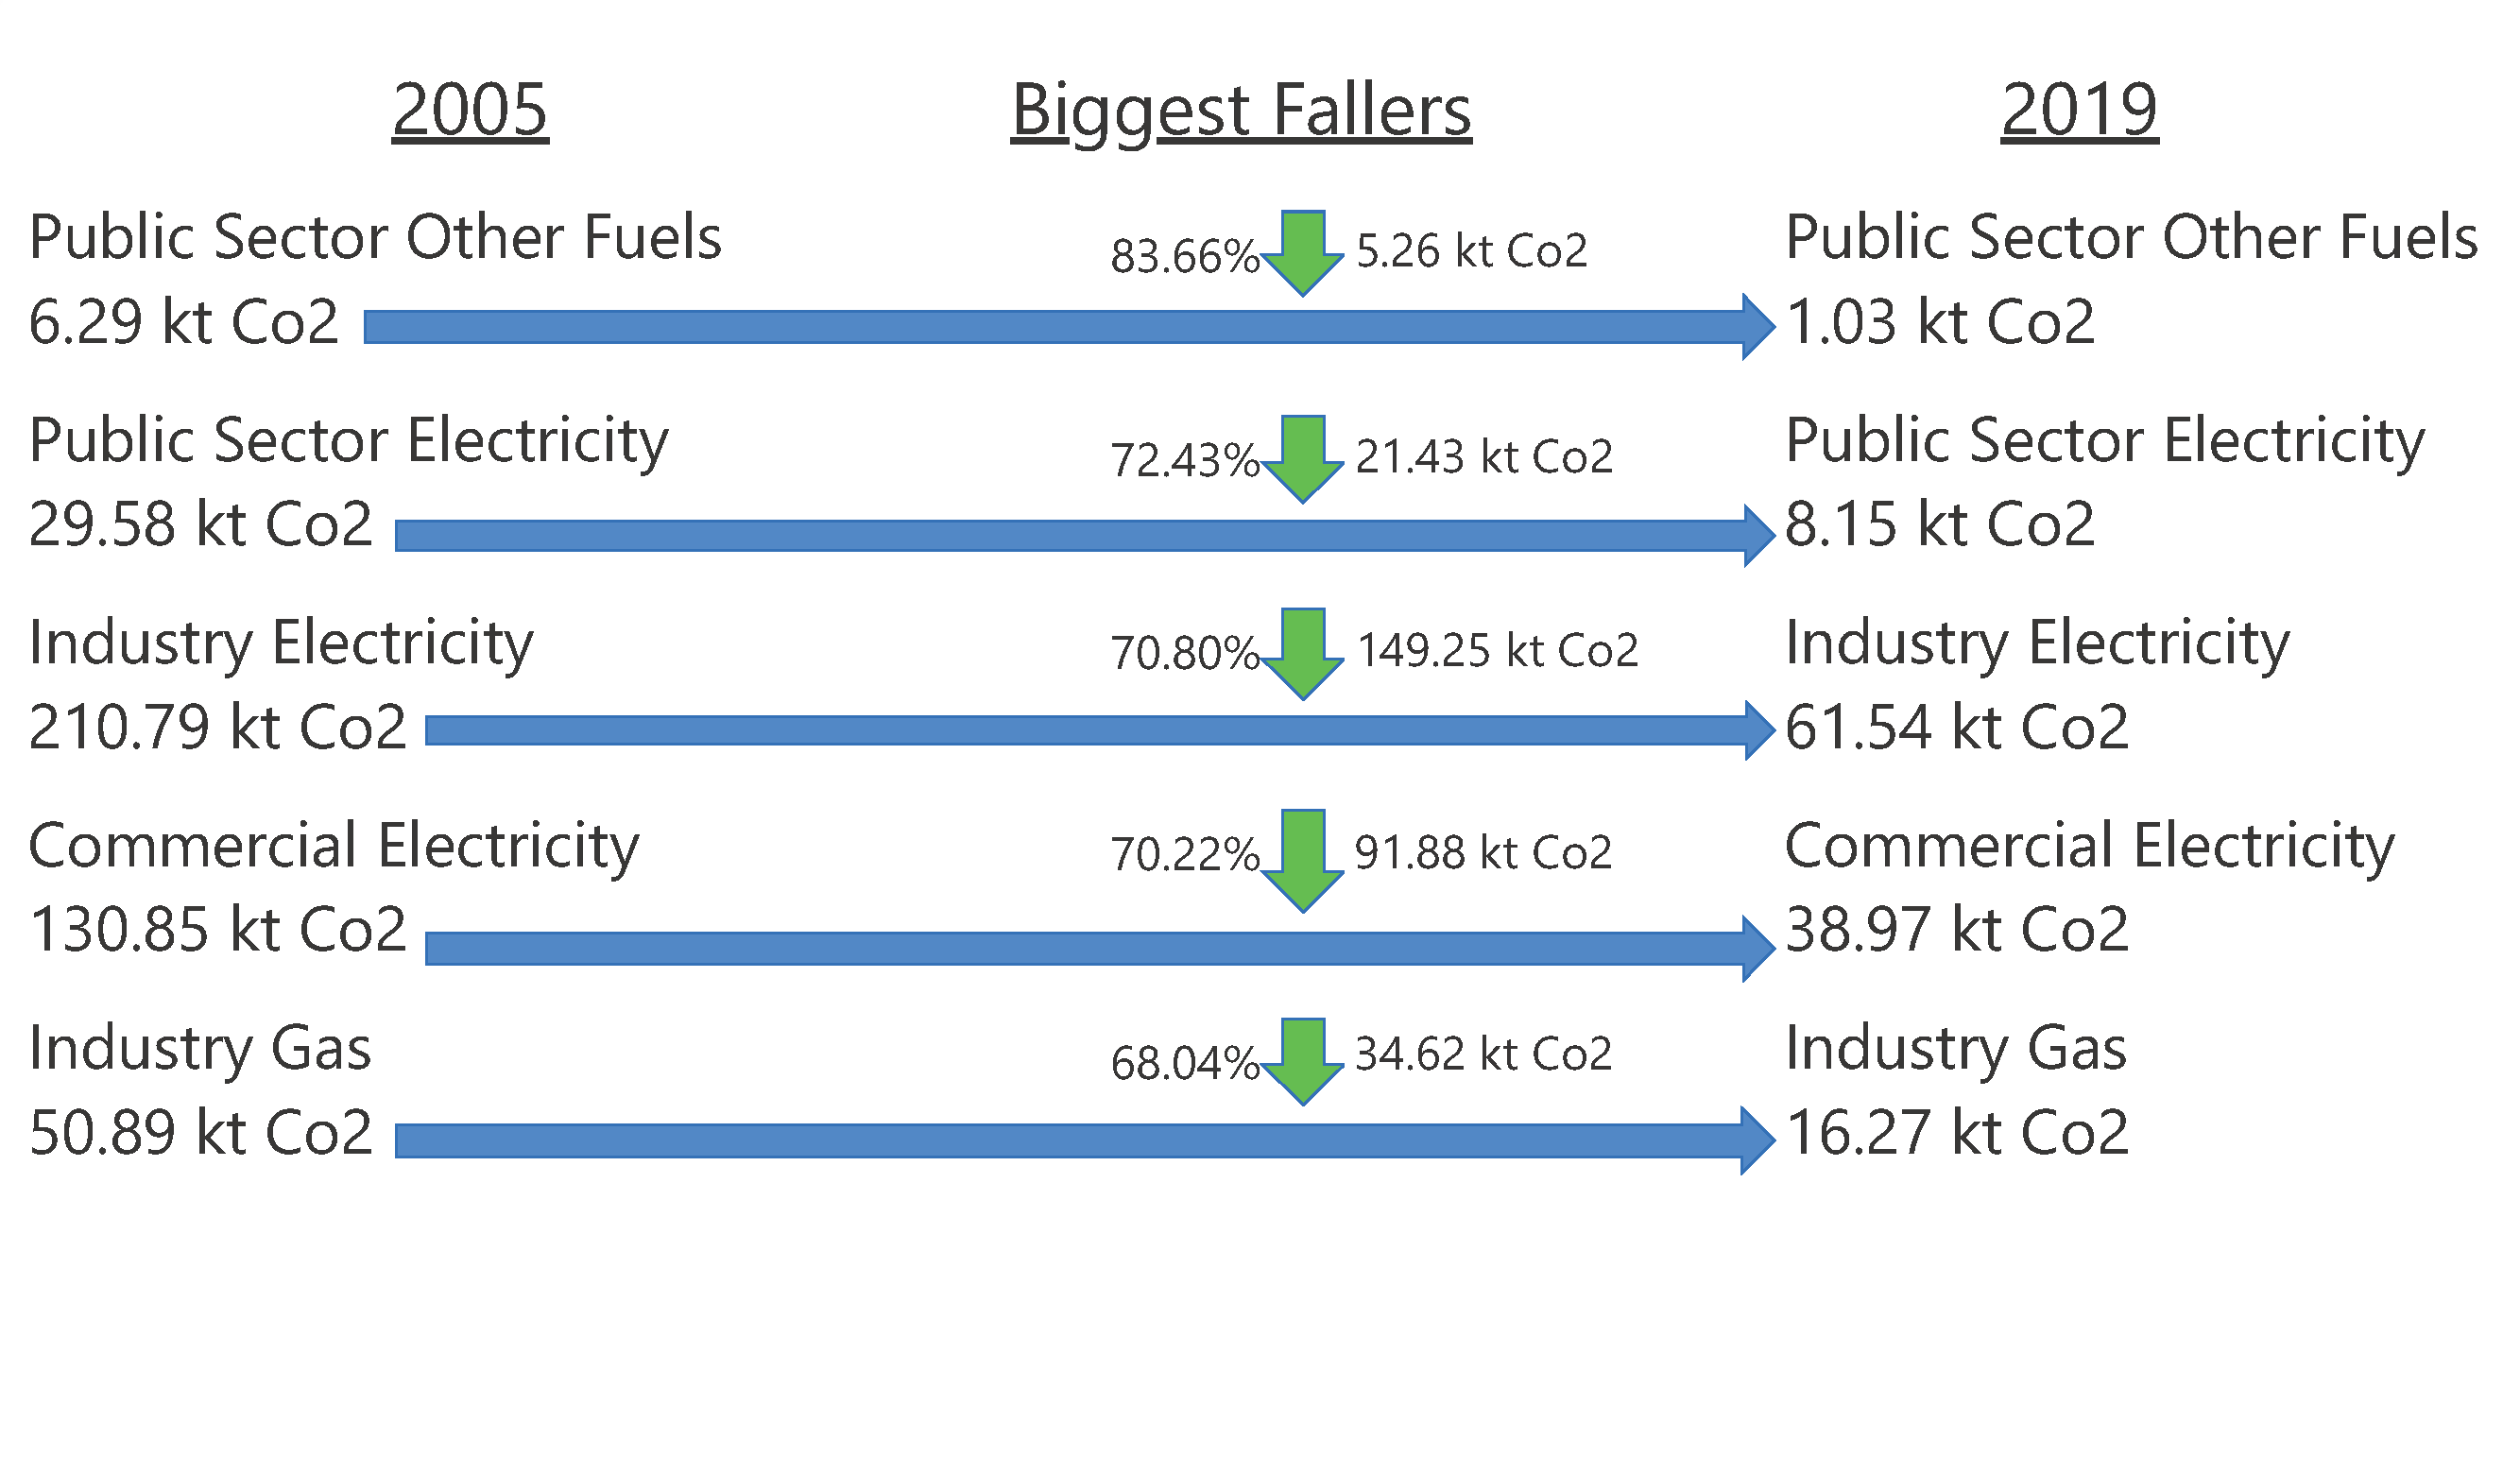 Graph showing the subsectors that have seen the biggest fall in co2 emissions from 2005 to 2019  Public Sector Other Fuels 83.66% fall Public Sector Electricity 72.43% fall Industry Electricity 70.8% fall Commercial electricity 70.225 fall Industry Gas 68.04% fall